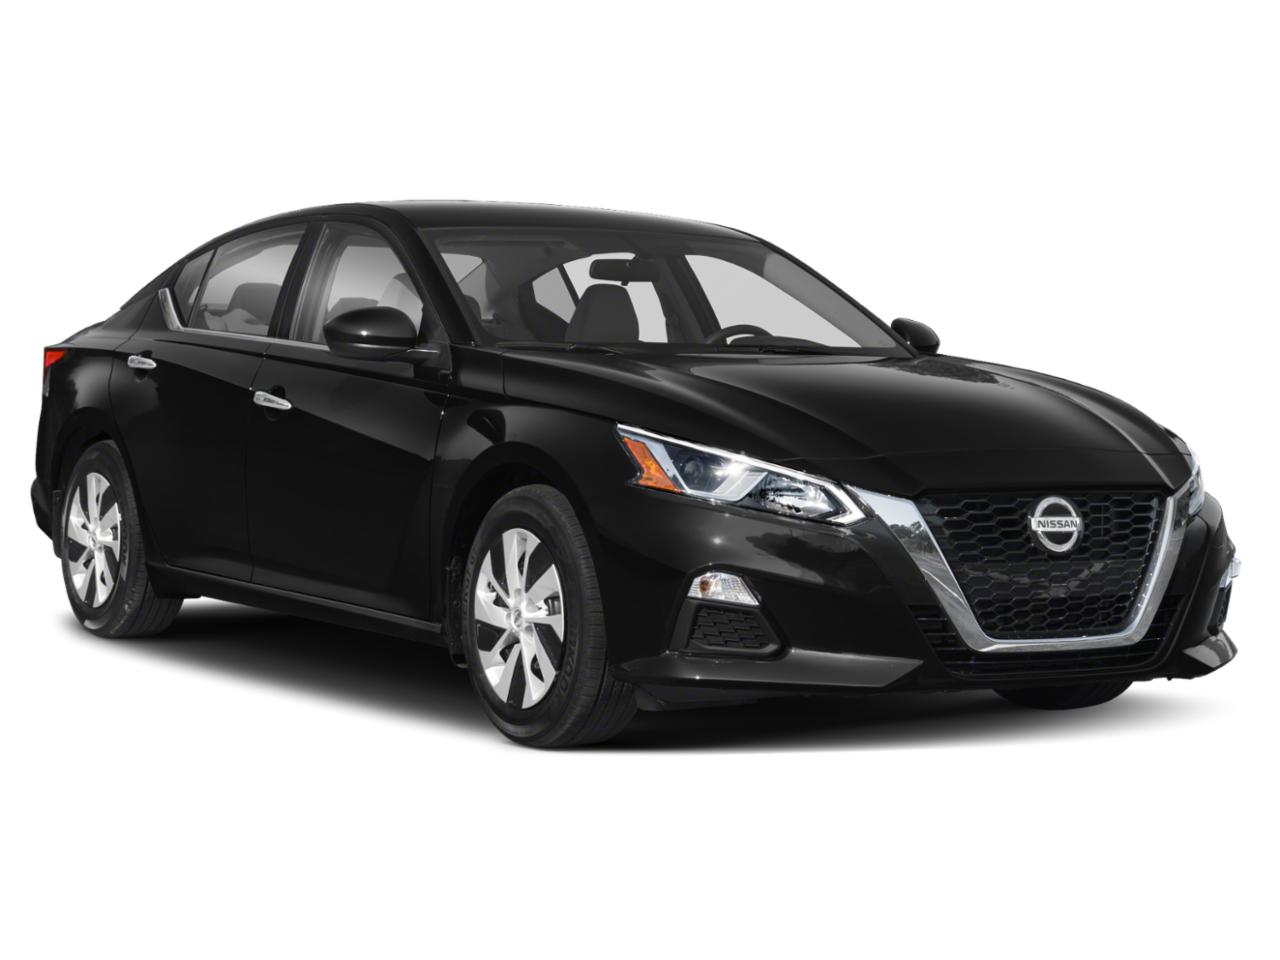 2020 Nissan Altima Vehicle Photo in Grapevine, TX 76051